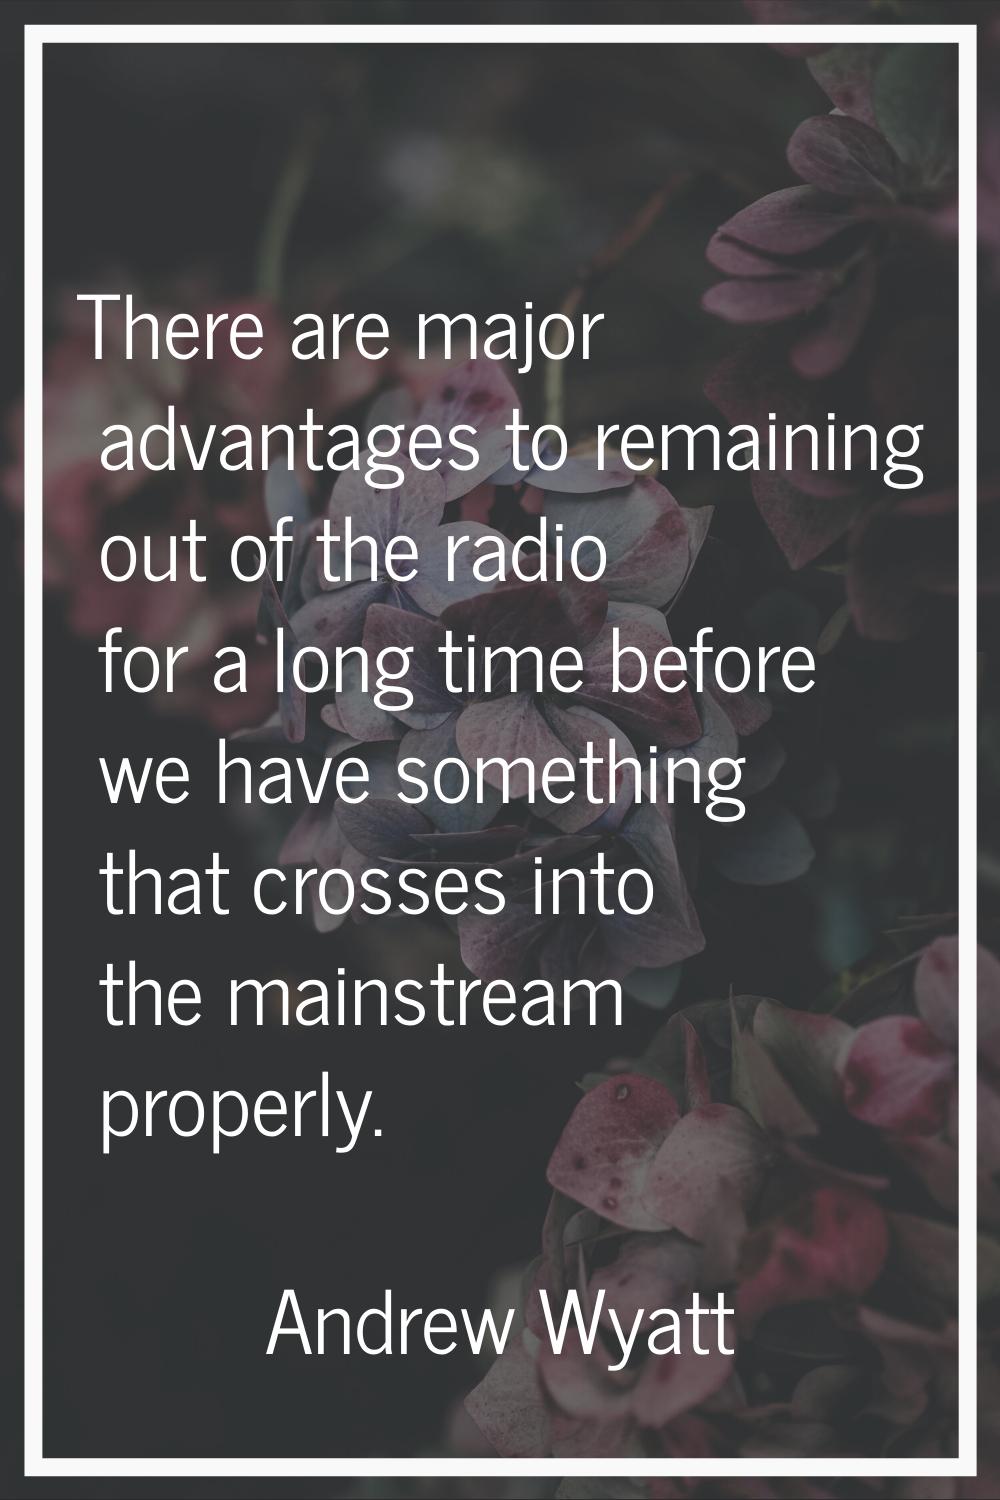 There are major advantages to remaining out of the radio for a long time before we have something t